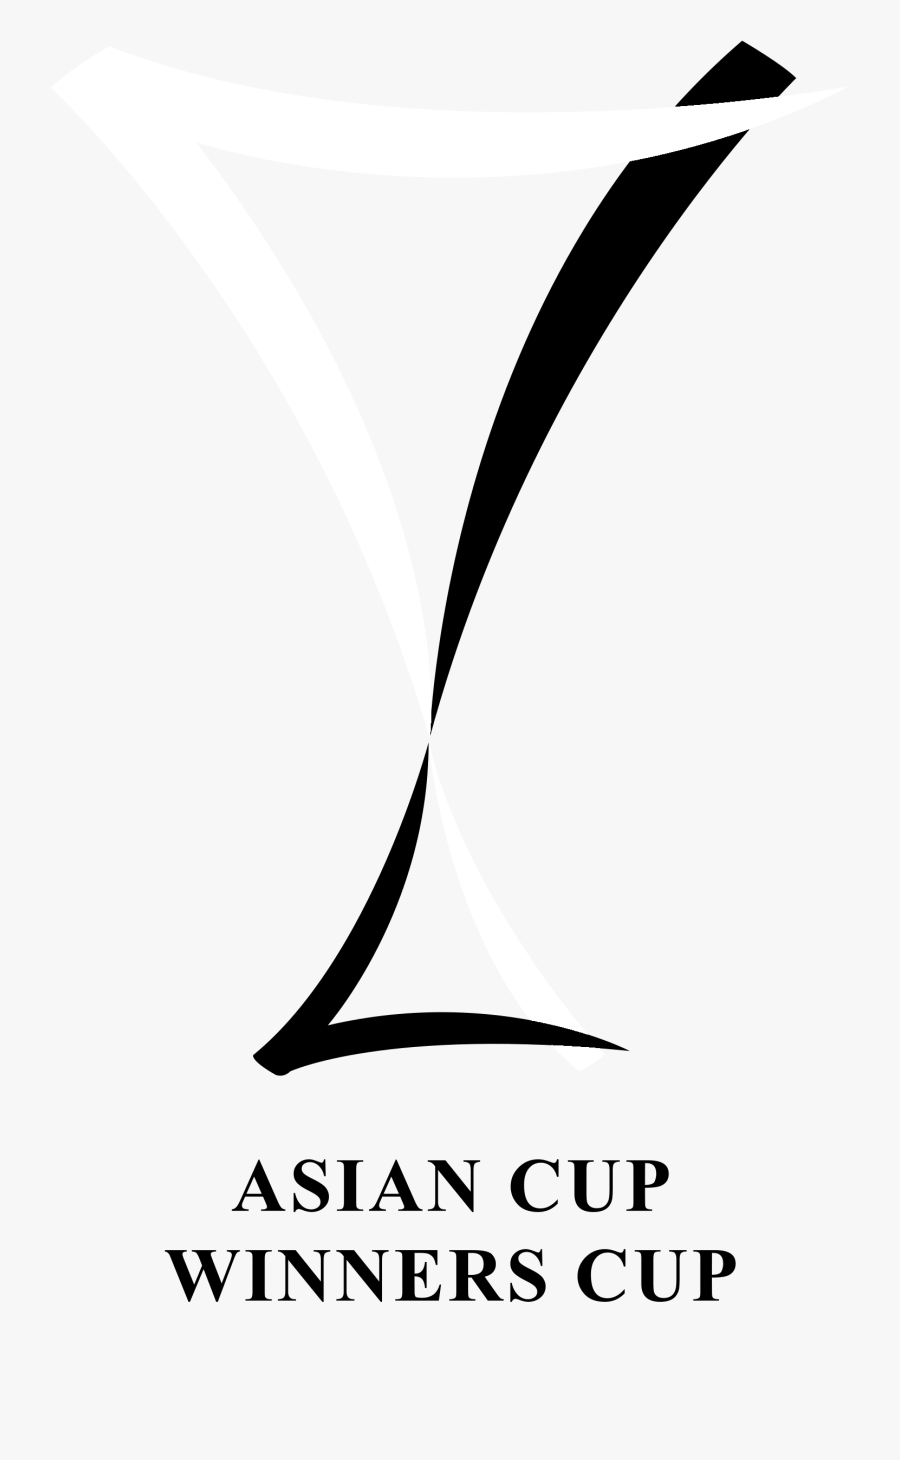 Asian Cup Winners Cup Logo Black And White - Kansas License Plates, Transparent Clipart